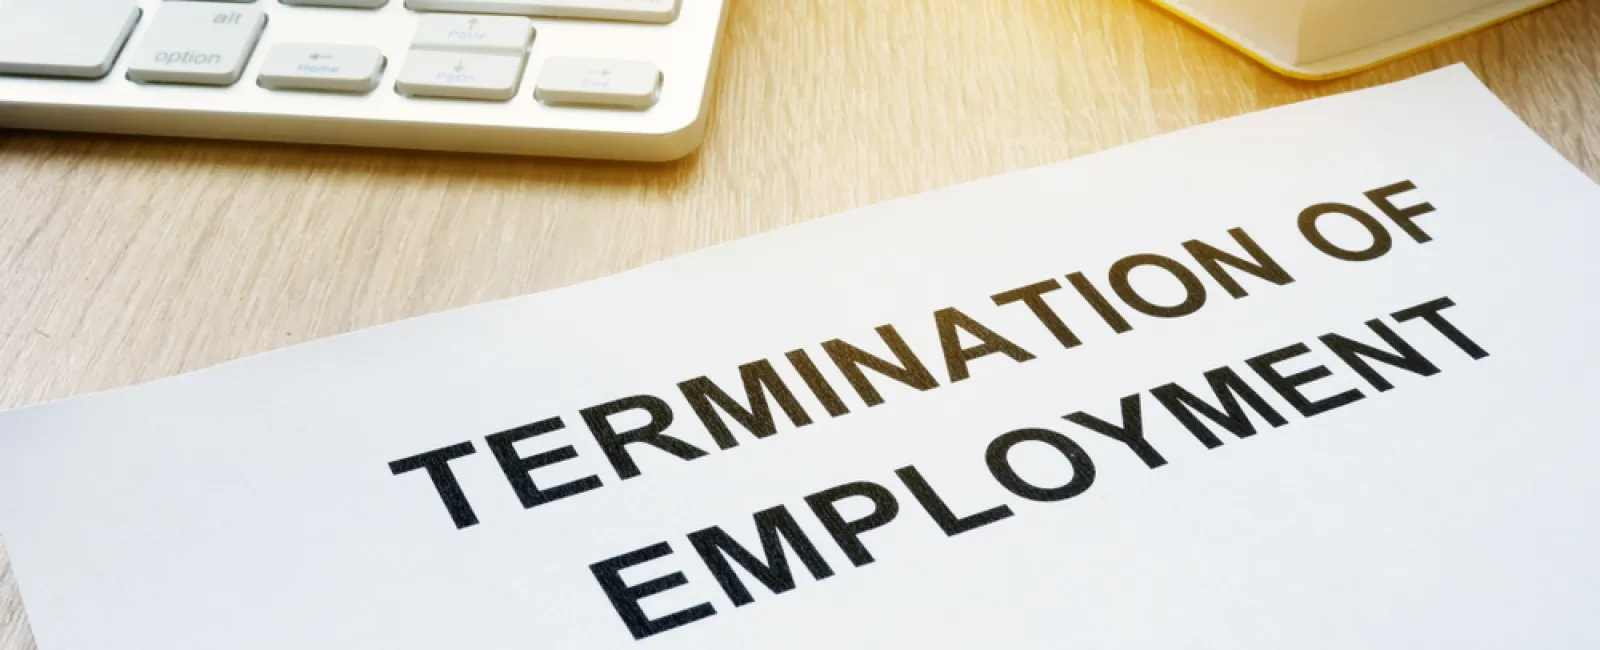 Recent Settlement Demonstrates the Importance of Termination Procedures